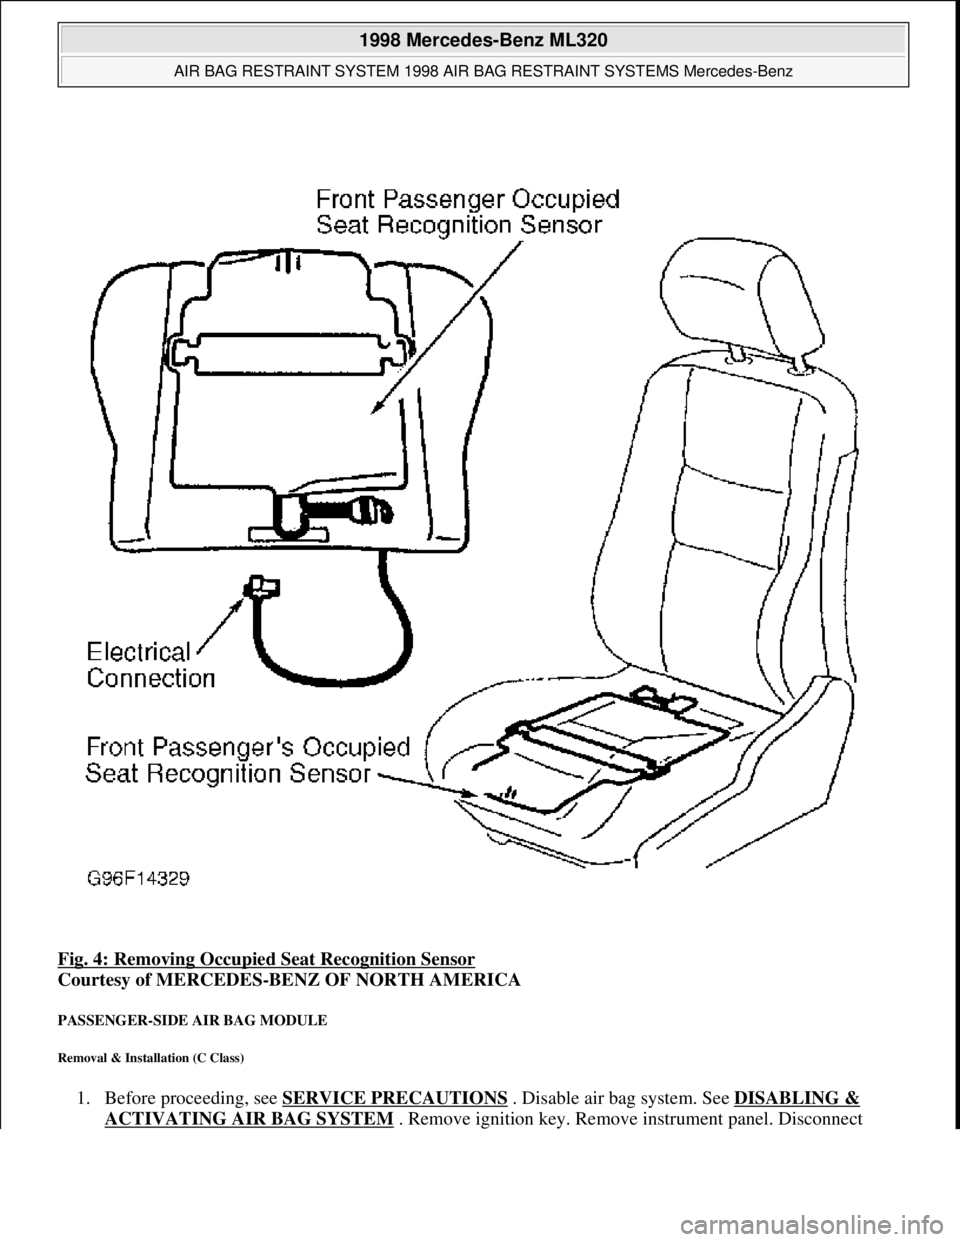 MERCEDES-BENZ ML320 1997  Complete Repair Manual Fig. 4: Removing Occupied Seat Recognition Sensor  
Courtesy of MERCEDES-BENZ OF NORTH AMERICA   
PASSENGER-SIDE AIR BAG MODULE 
Removal & Installation (C Class) 
1. Before proceeding, see SERVICE PRE